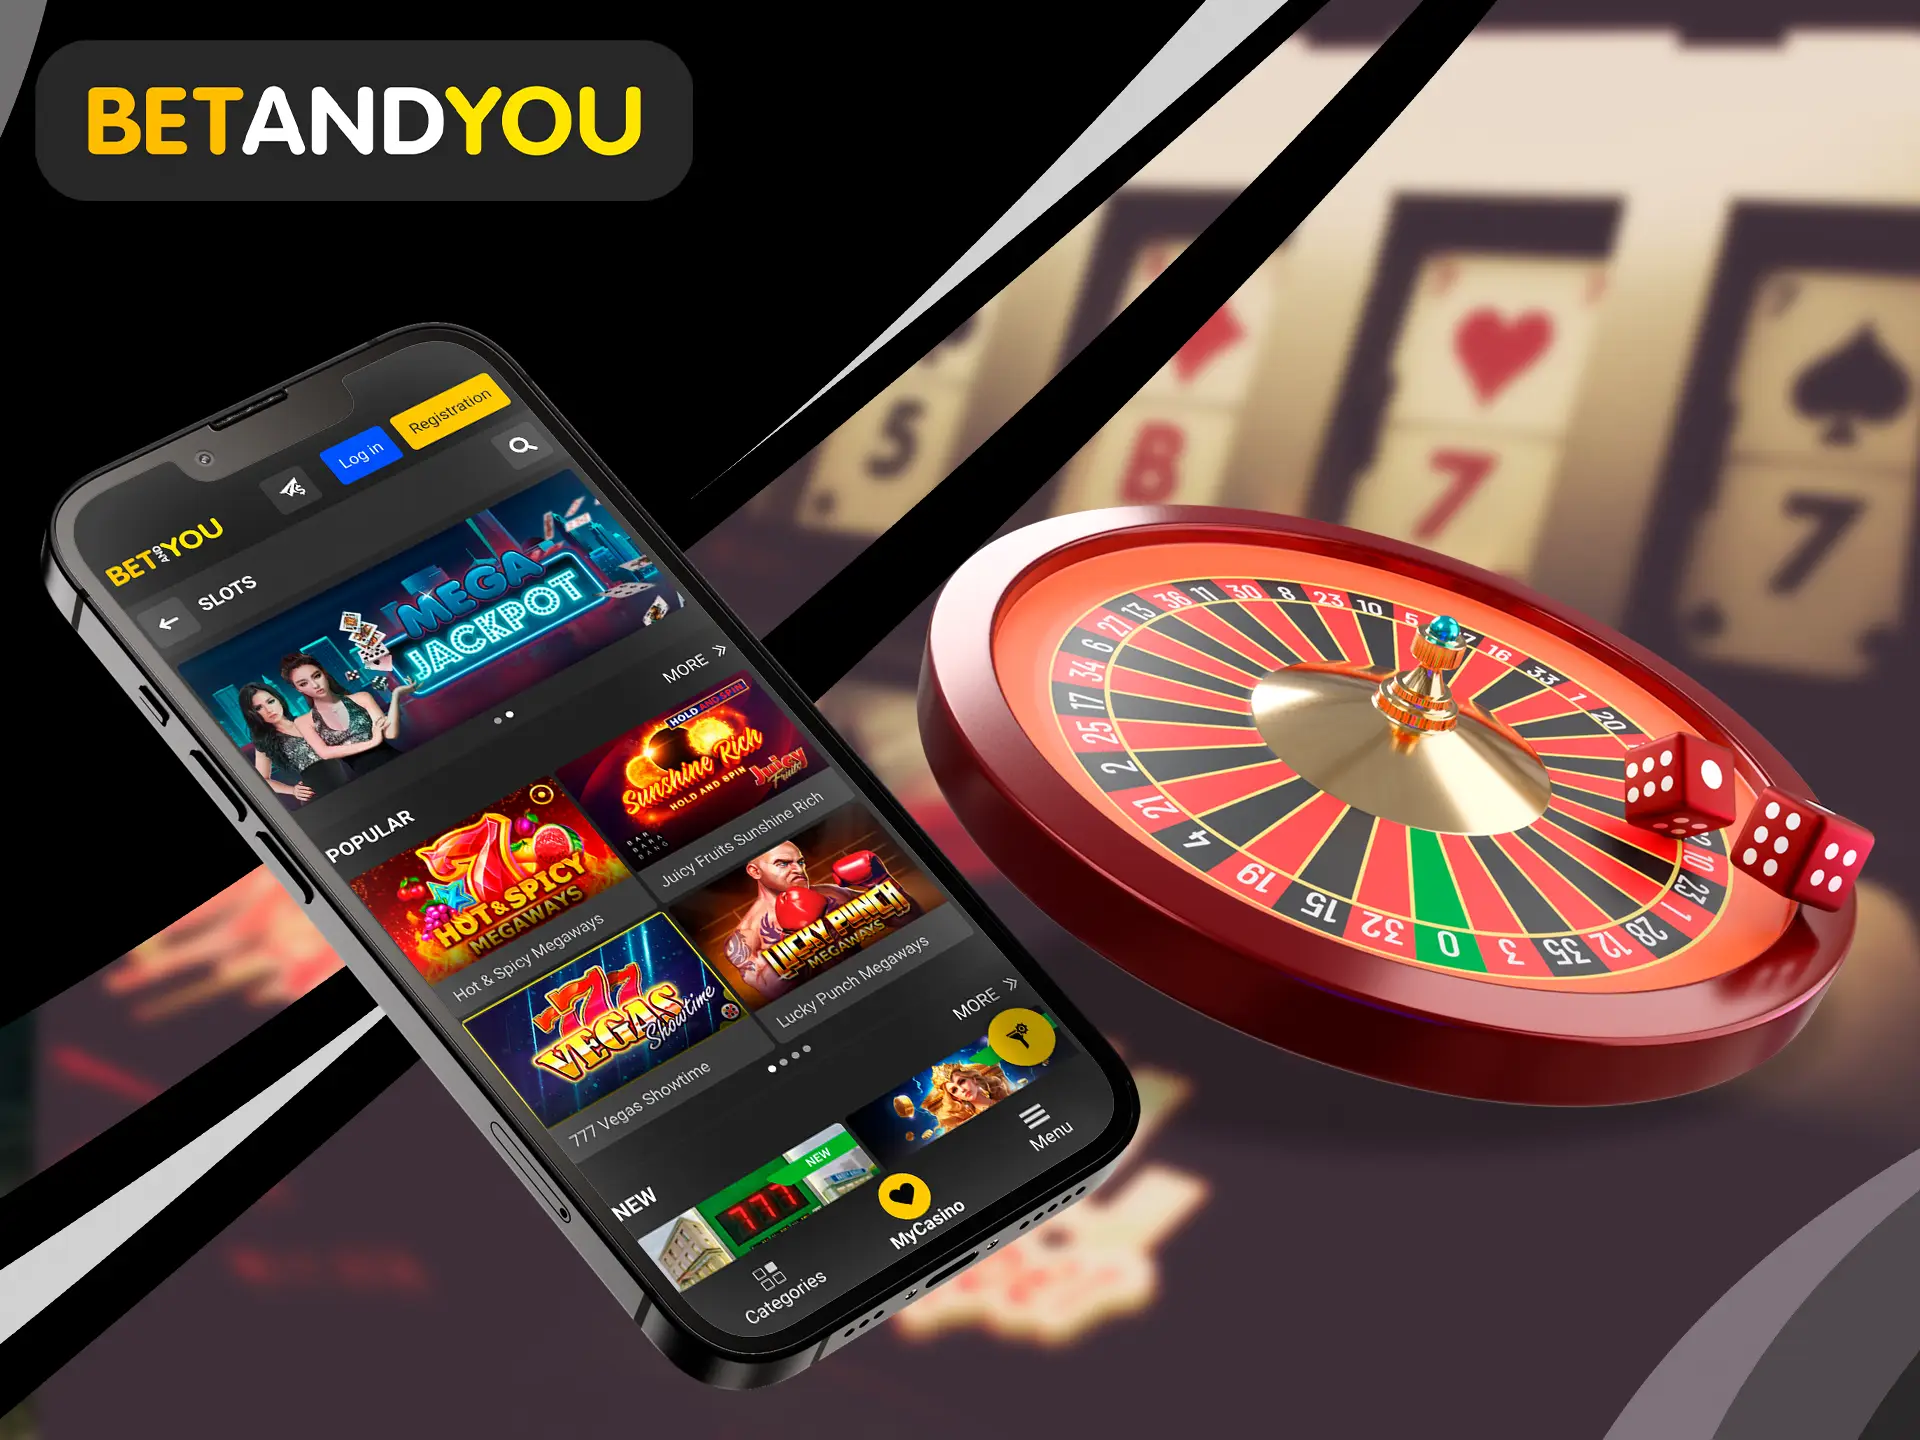 You can get the official software from Betandyou on your smartphone and play games wherever you want.